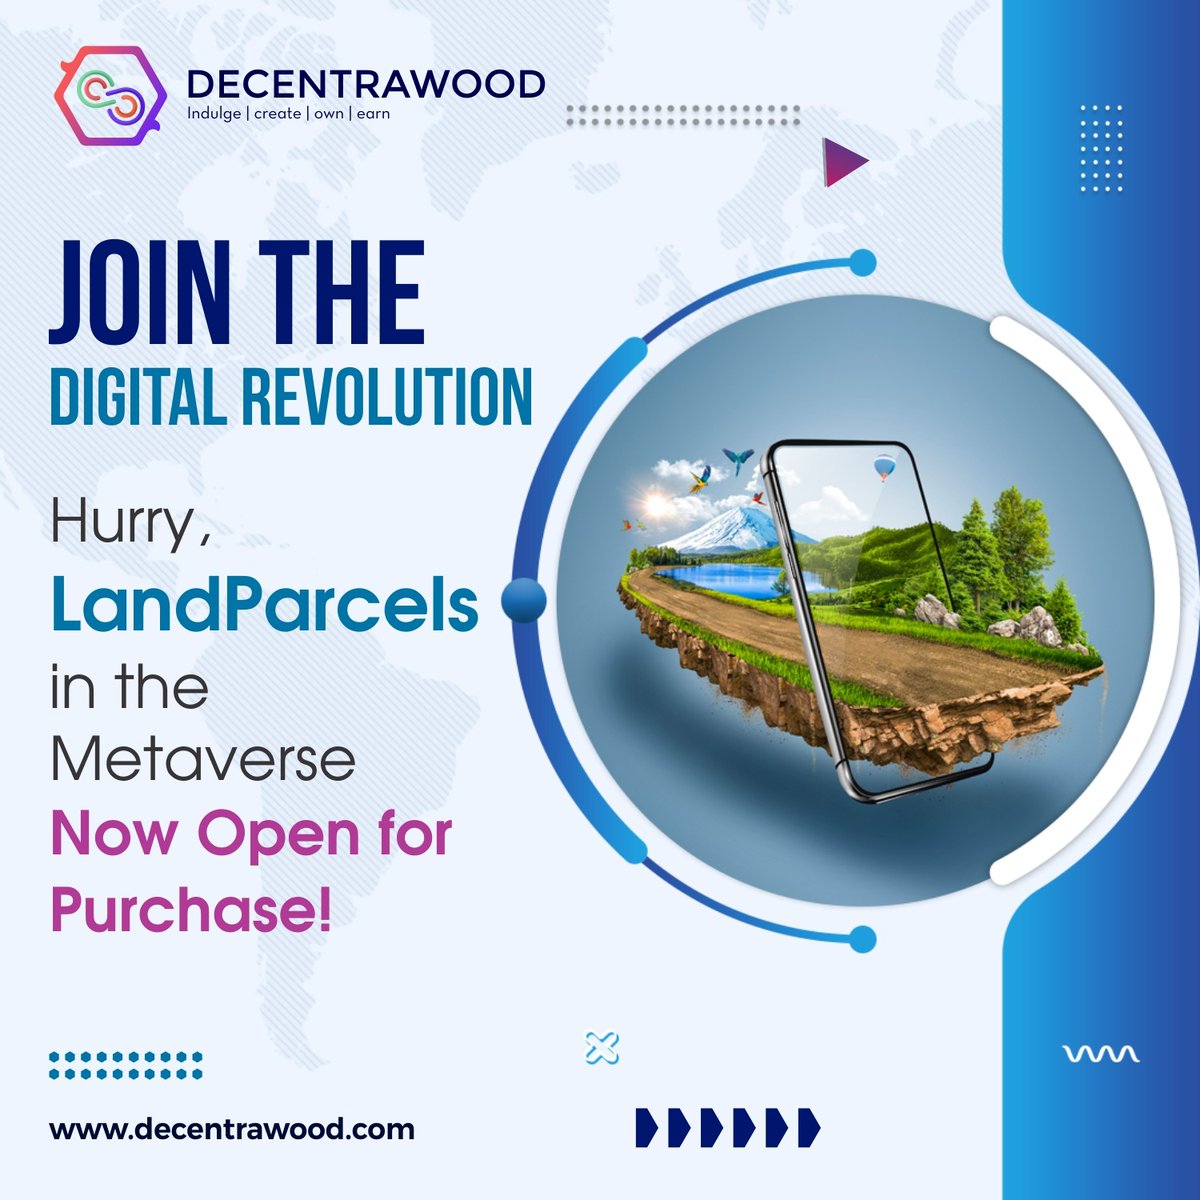 Wait is over
Claim Your Virtual Realm Today! Exclusively launching our decentrawood landparcel go and buy Your landparcel to build Your virtual world .

#decentrawood #metaverse #metaland #VirtualReality  #landparcel #digital #lunch